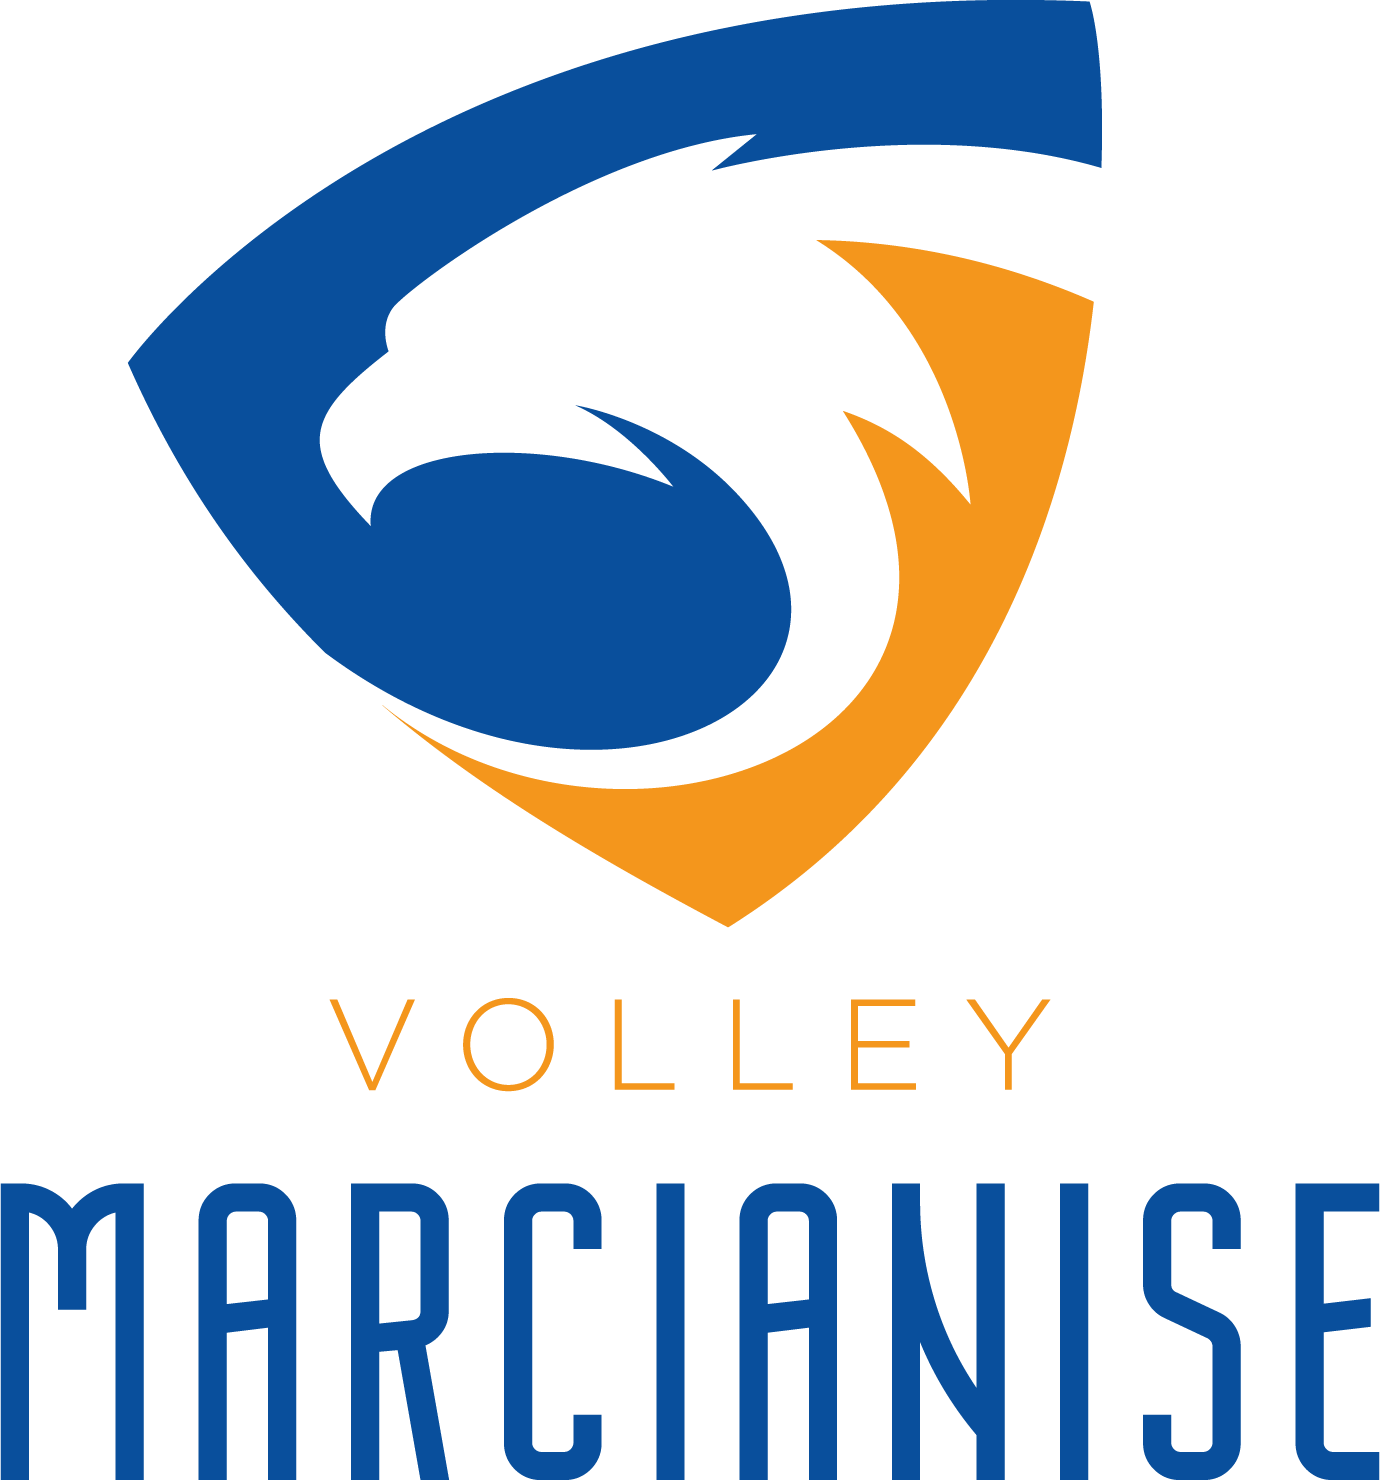 VOLLEY MARCIANISE